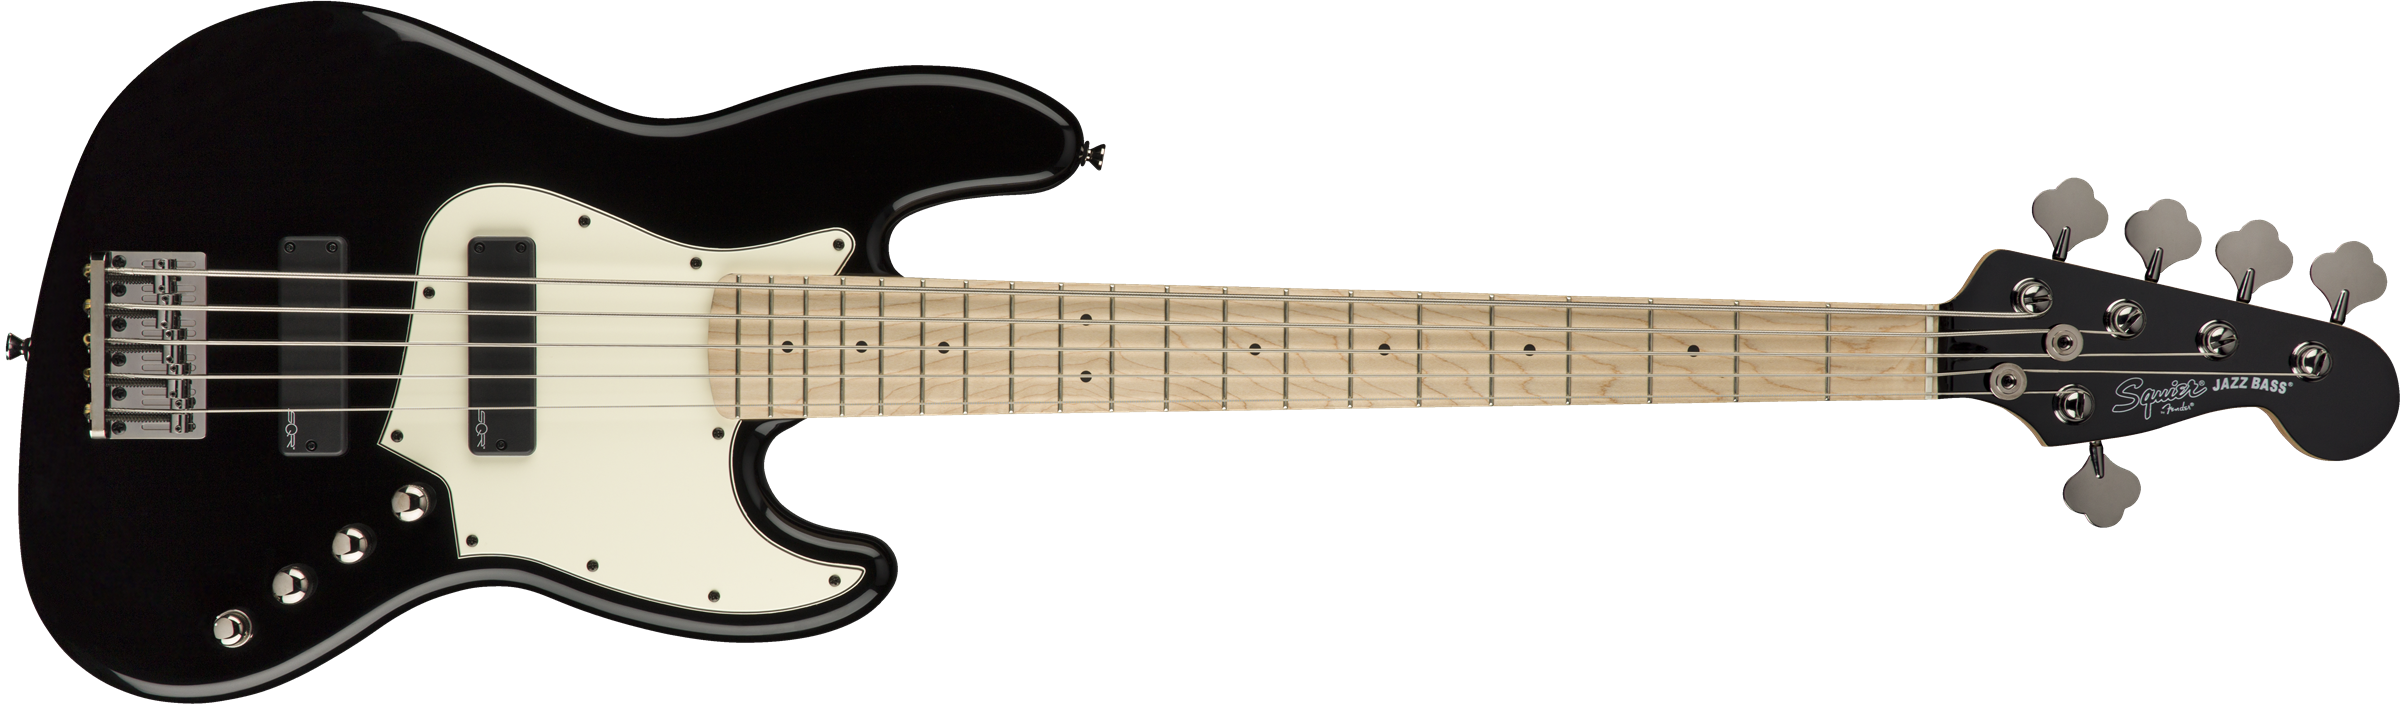 Squier Contemporary Active Jazz Bass V HH Maple Fingerboard in Black